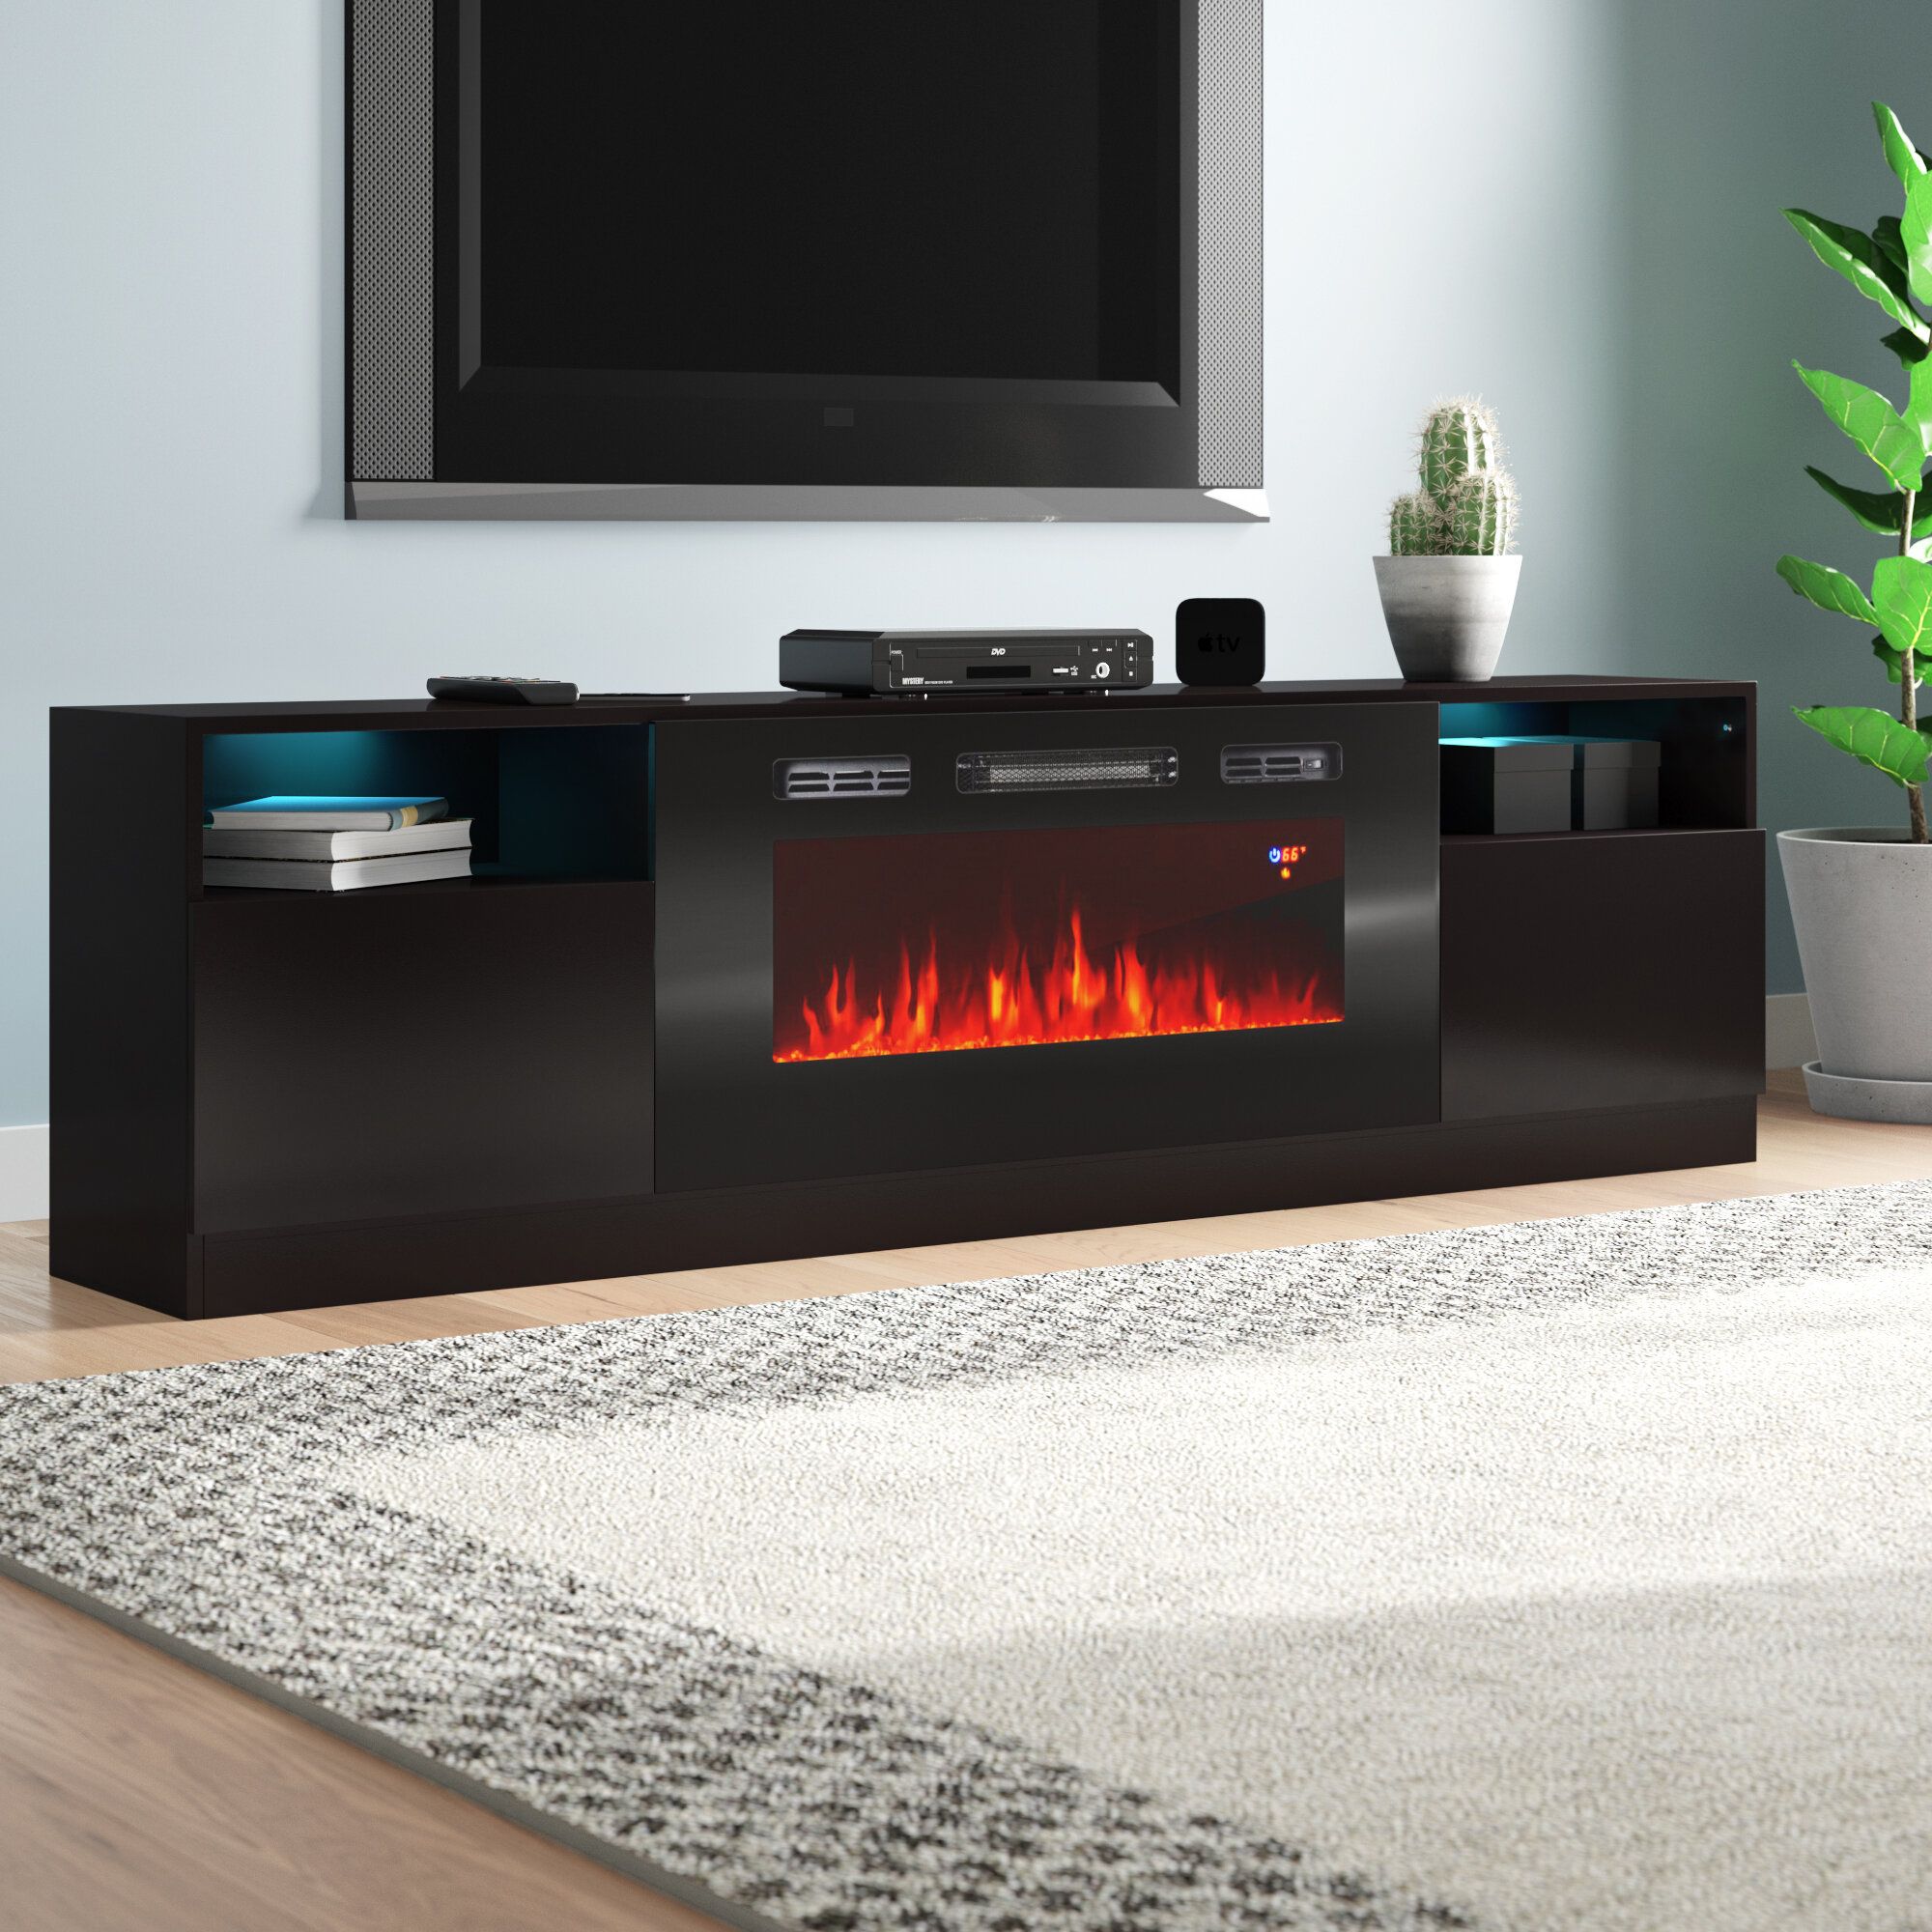 Black Fireplace Tv Stands & Entertainment Centers You'll Within Freestanding Tv Stands (View 8 of 15)